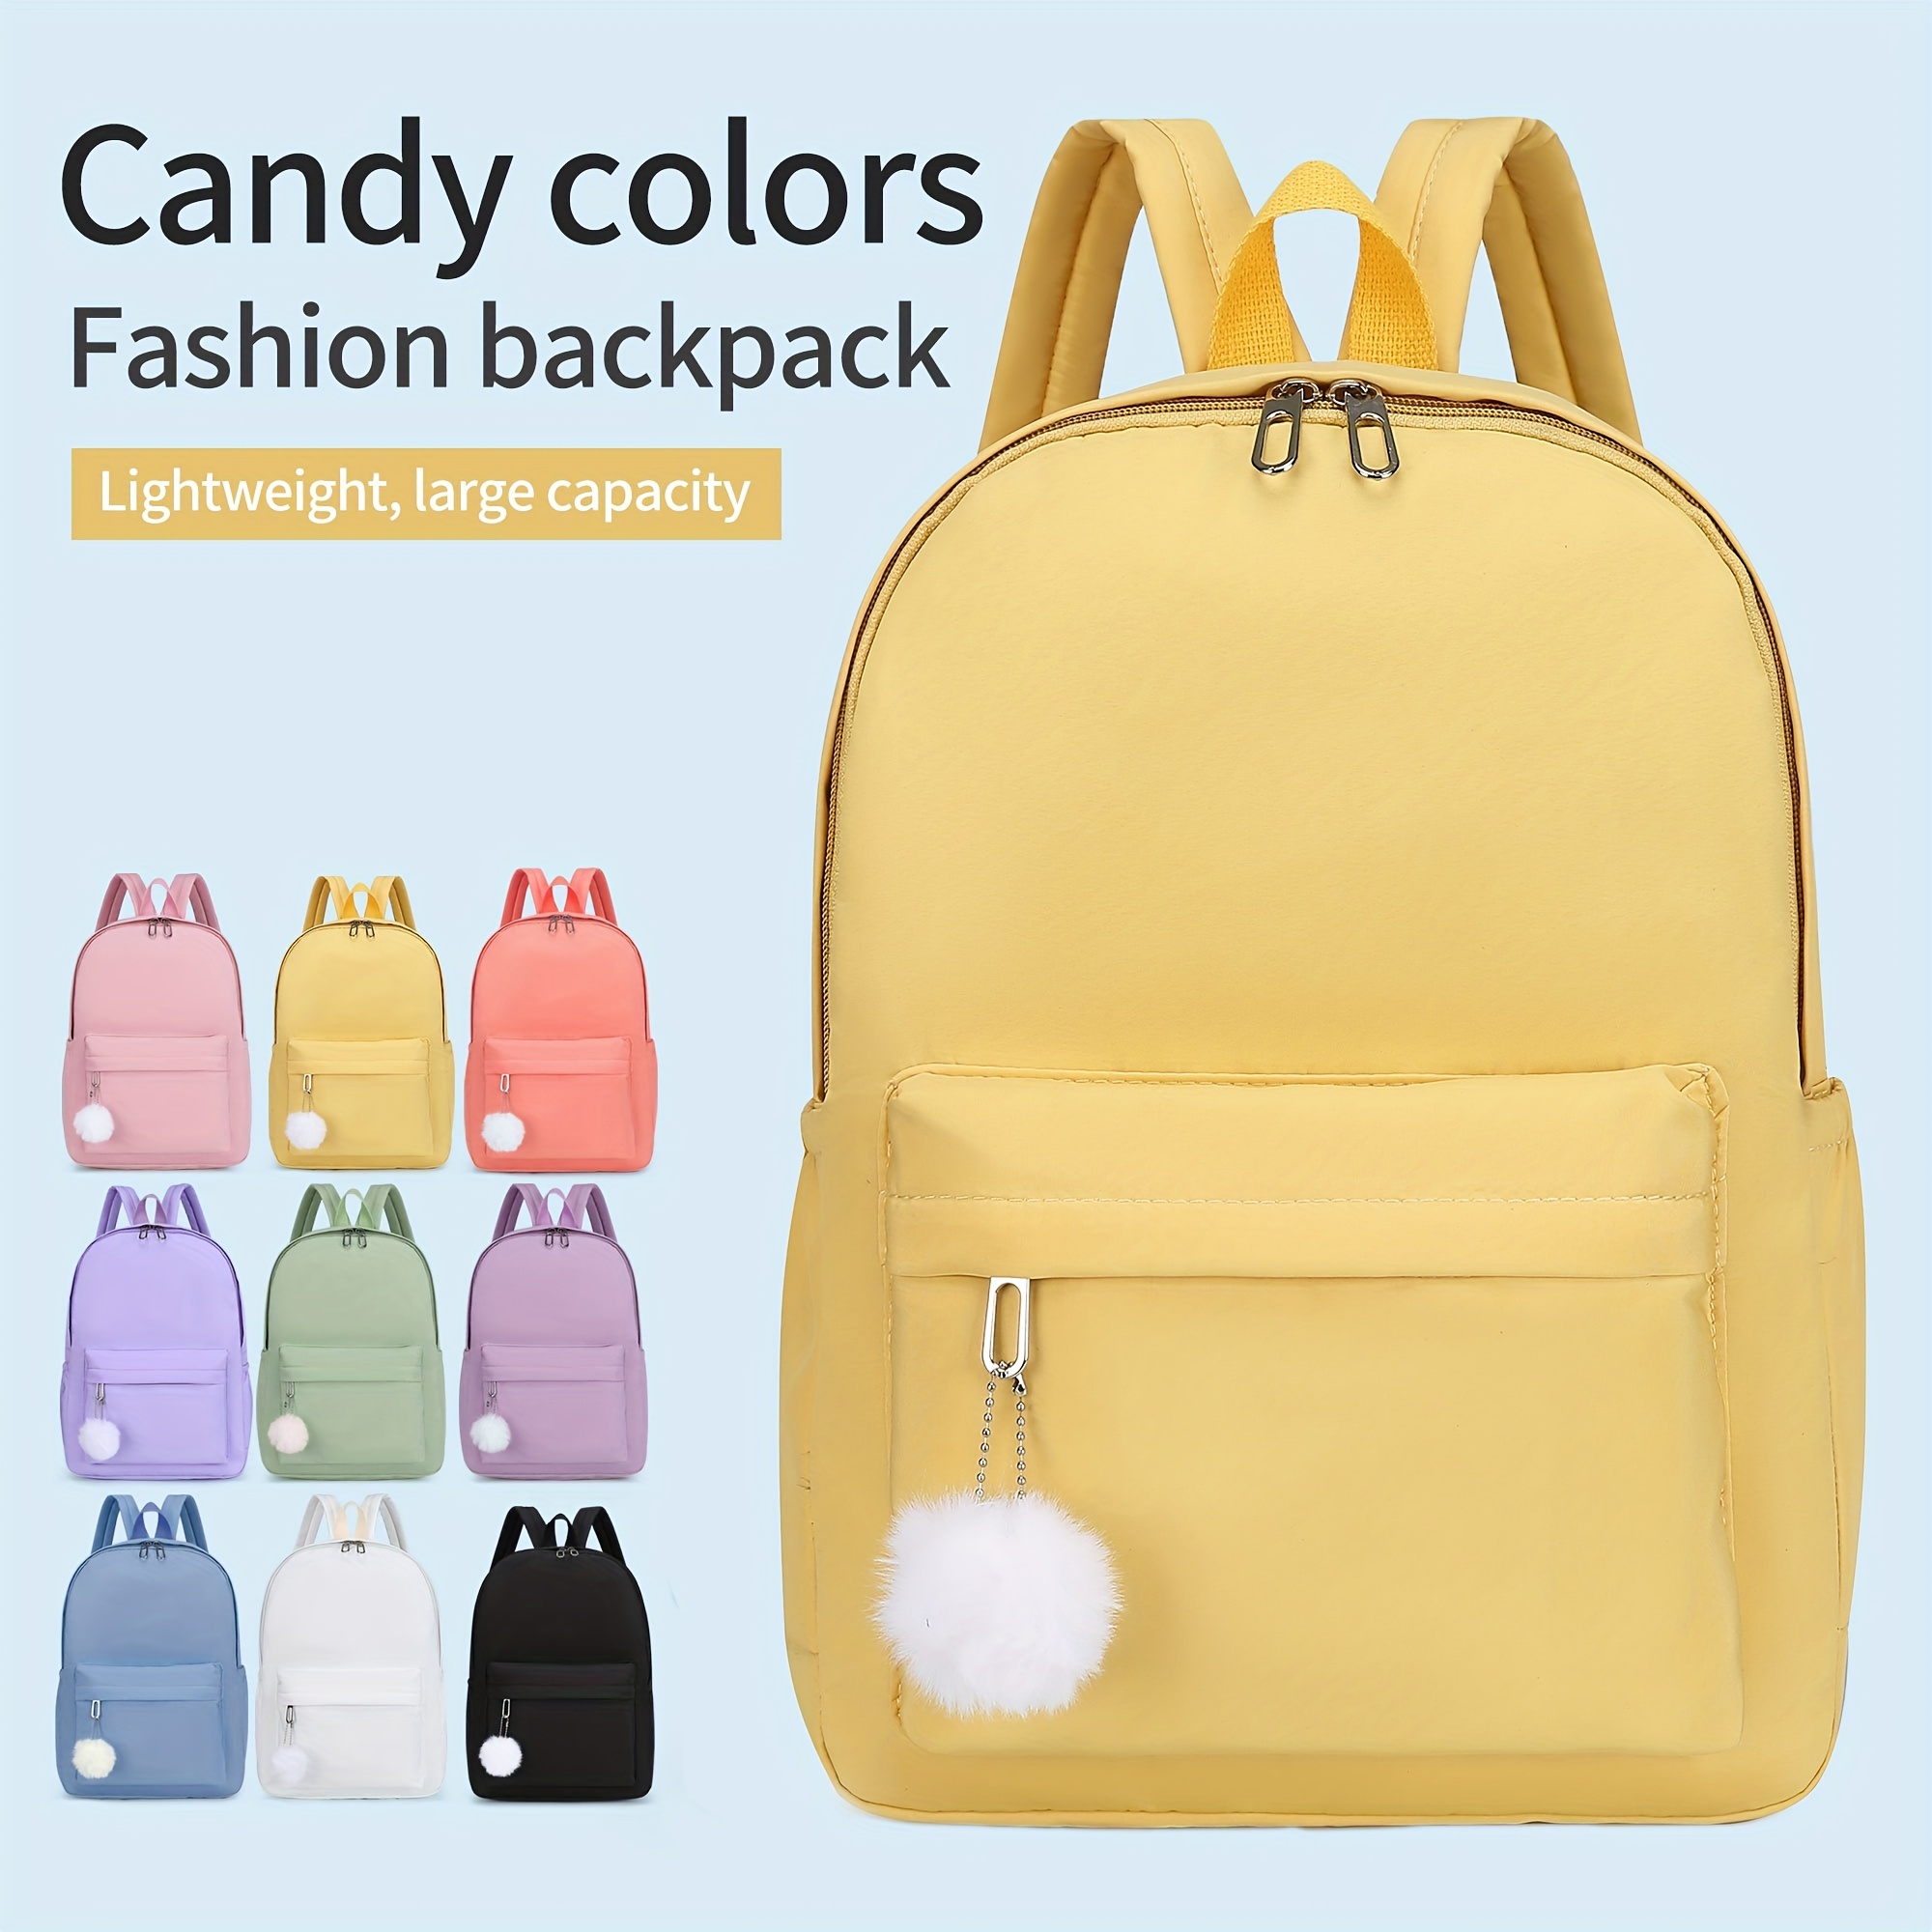 KALIDI Casual Backpack for Women,15 Inches Laptop Classic Backpack Camping Rucksack Travel Outdoor Daypack College School Bag, Yellow